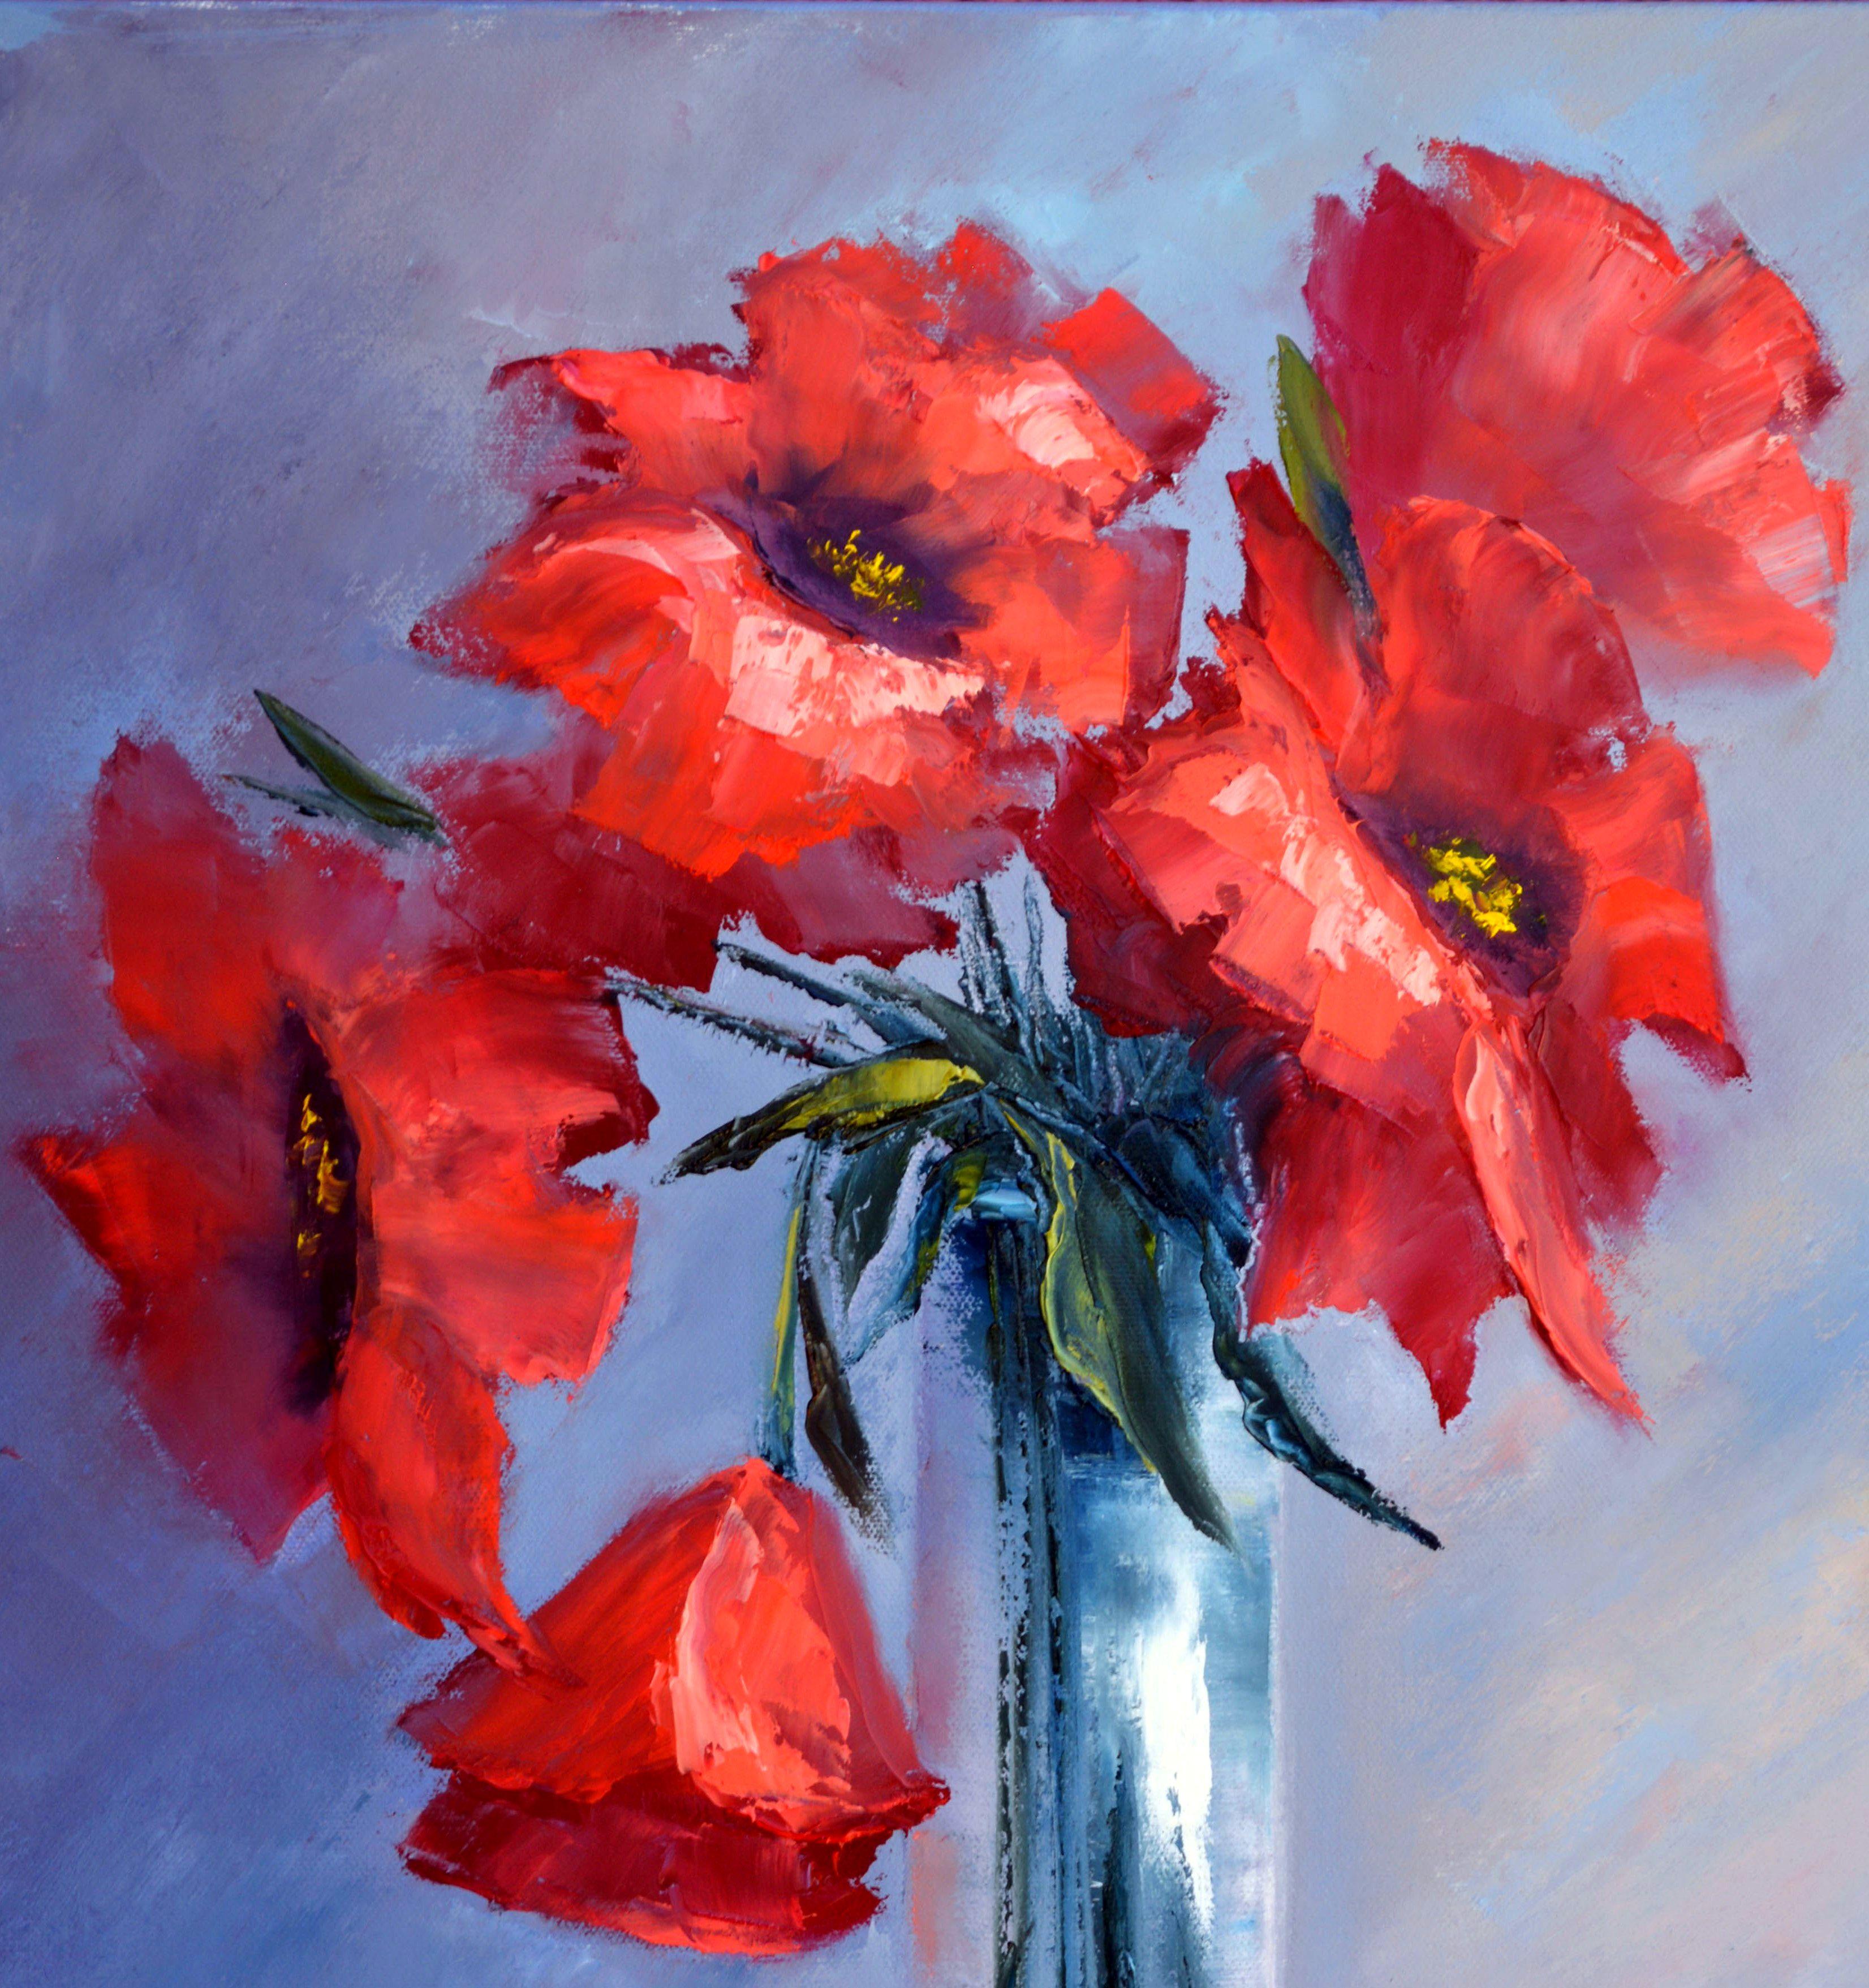 In this oil canvas, I've captured the vibrant spirit of nature. My brushstrokes dance between expressionism and impressionism, while touches of realism root the piece in a tangible warmth. The lively reds against the serene blue create a visual